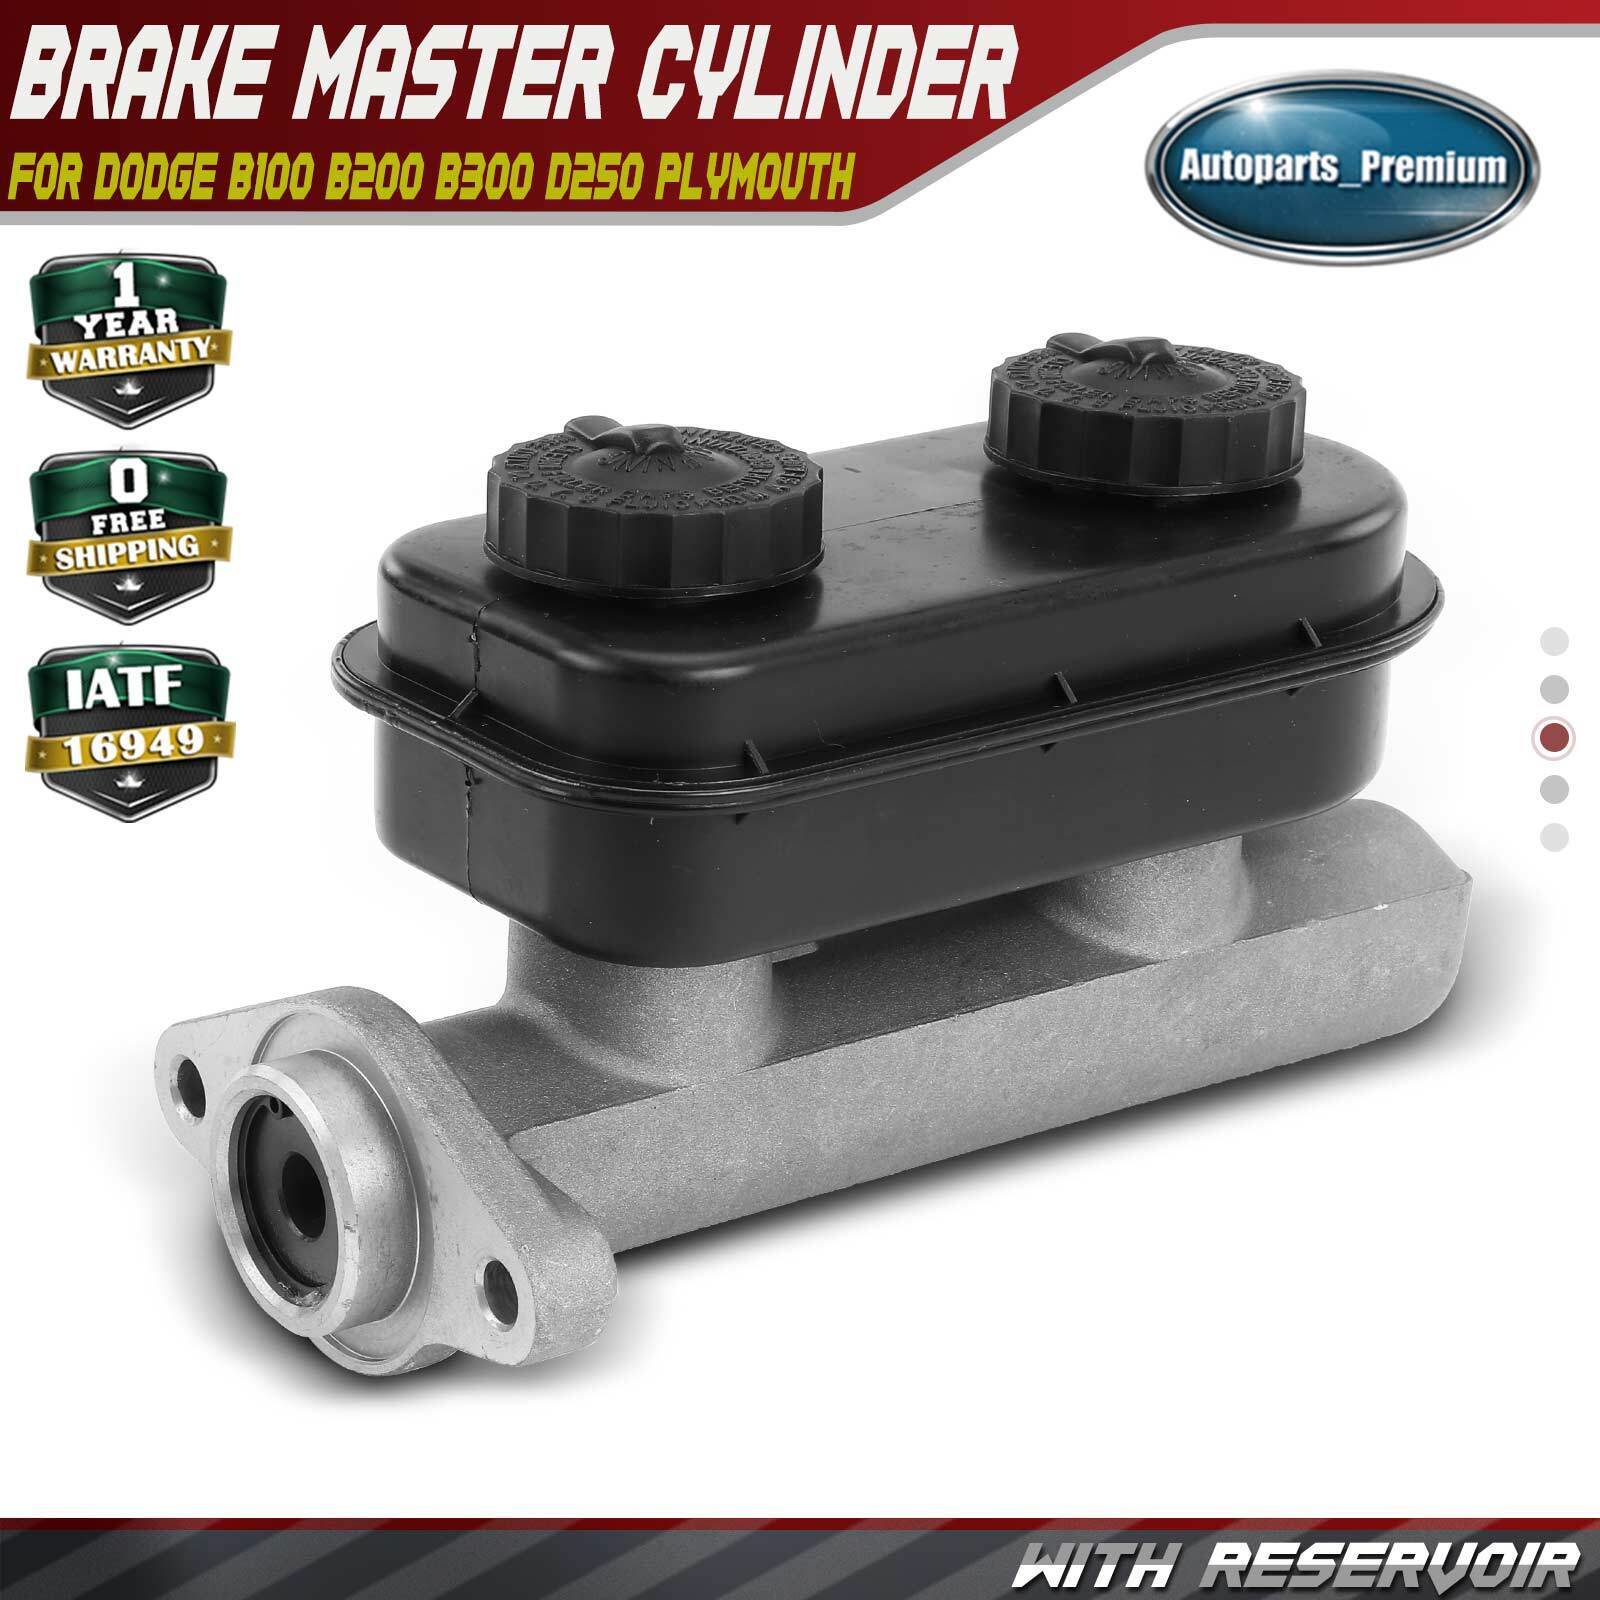 Brake Master Cylinder with Reservoir for Dodge B100 B200 B300 D150 D250 Plymouth